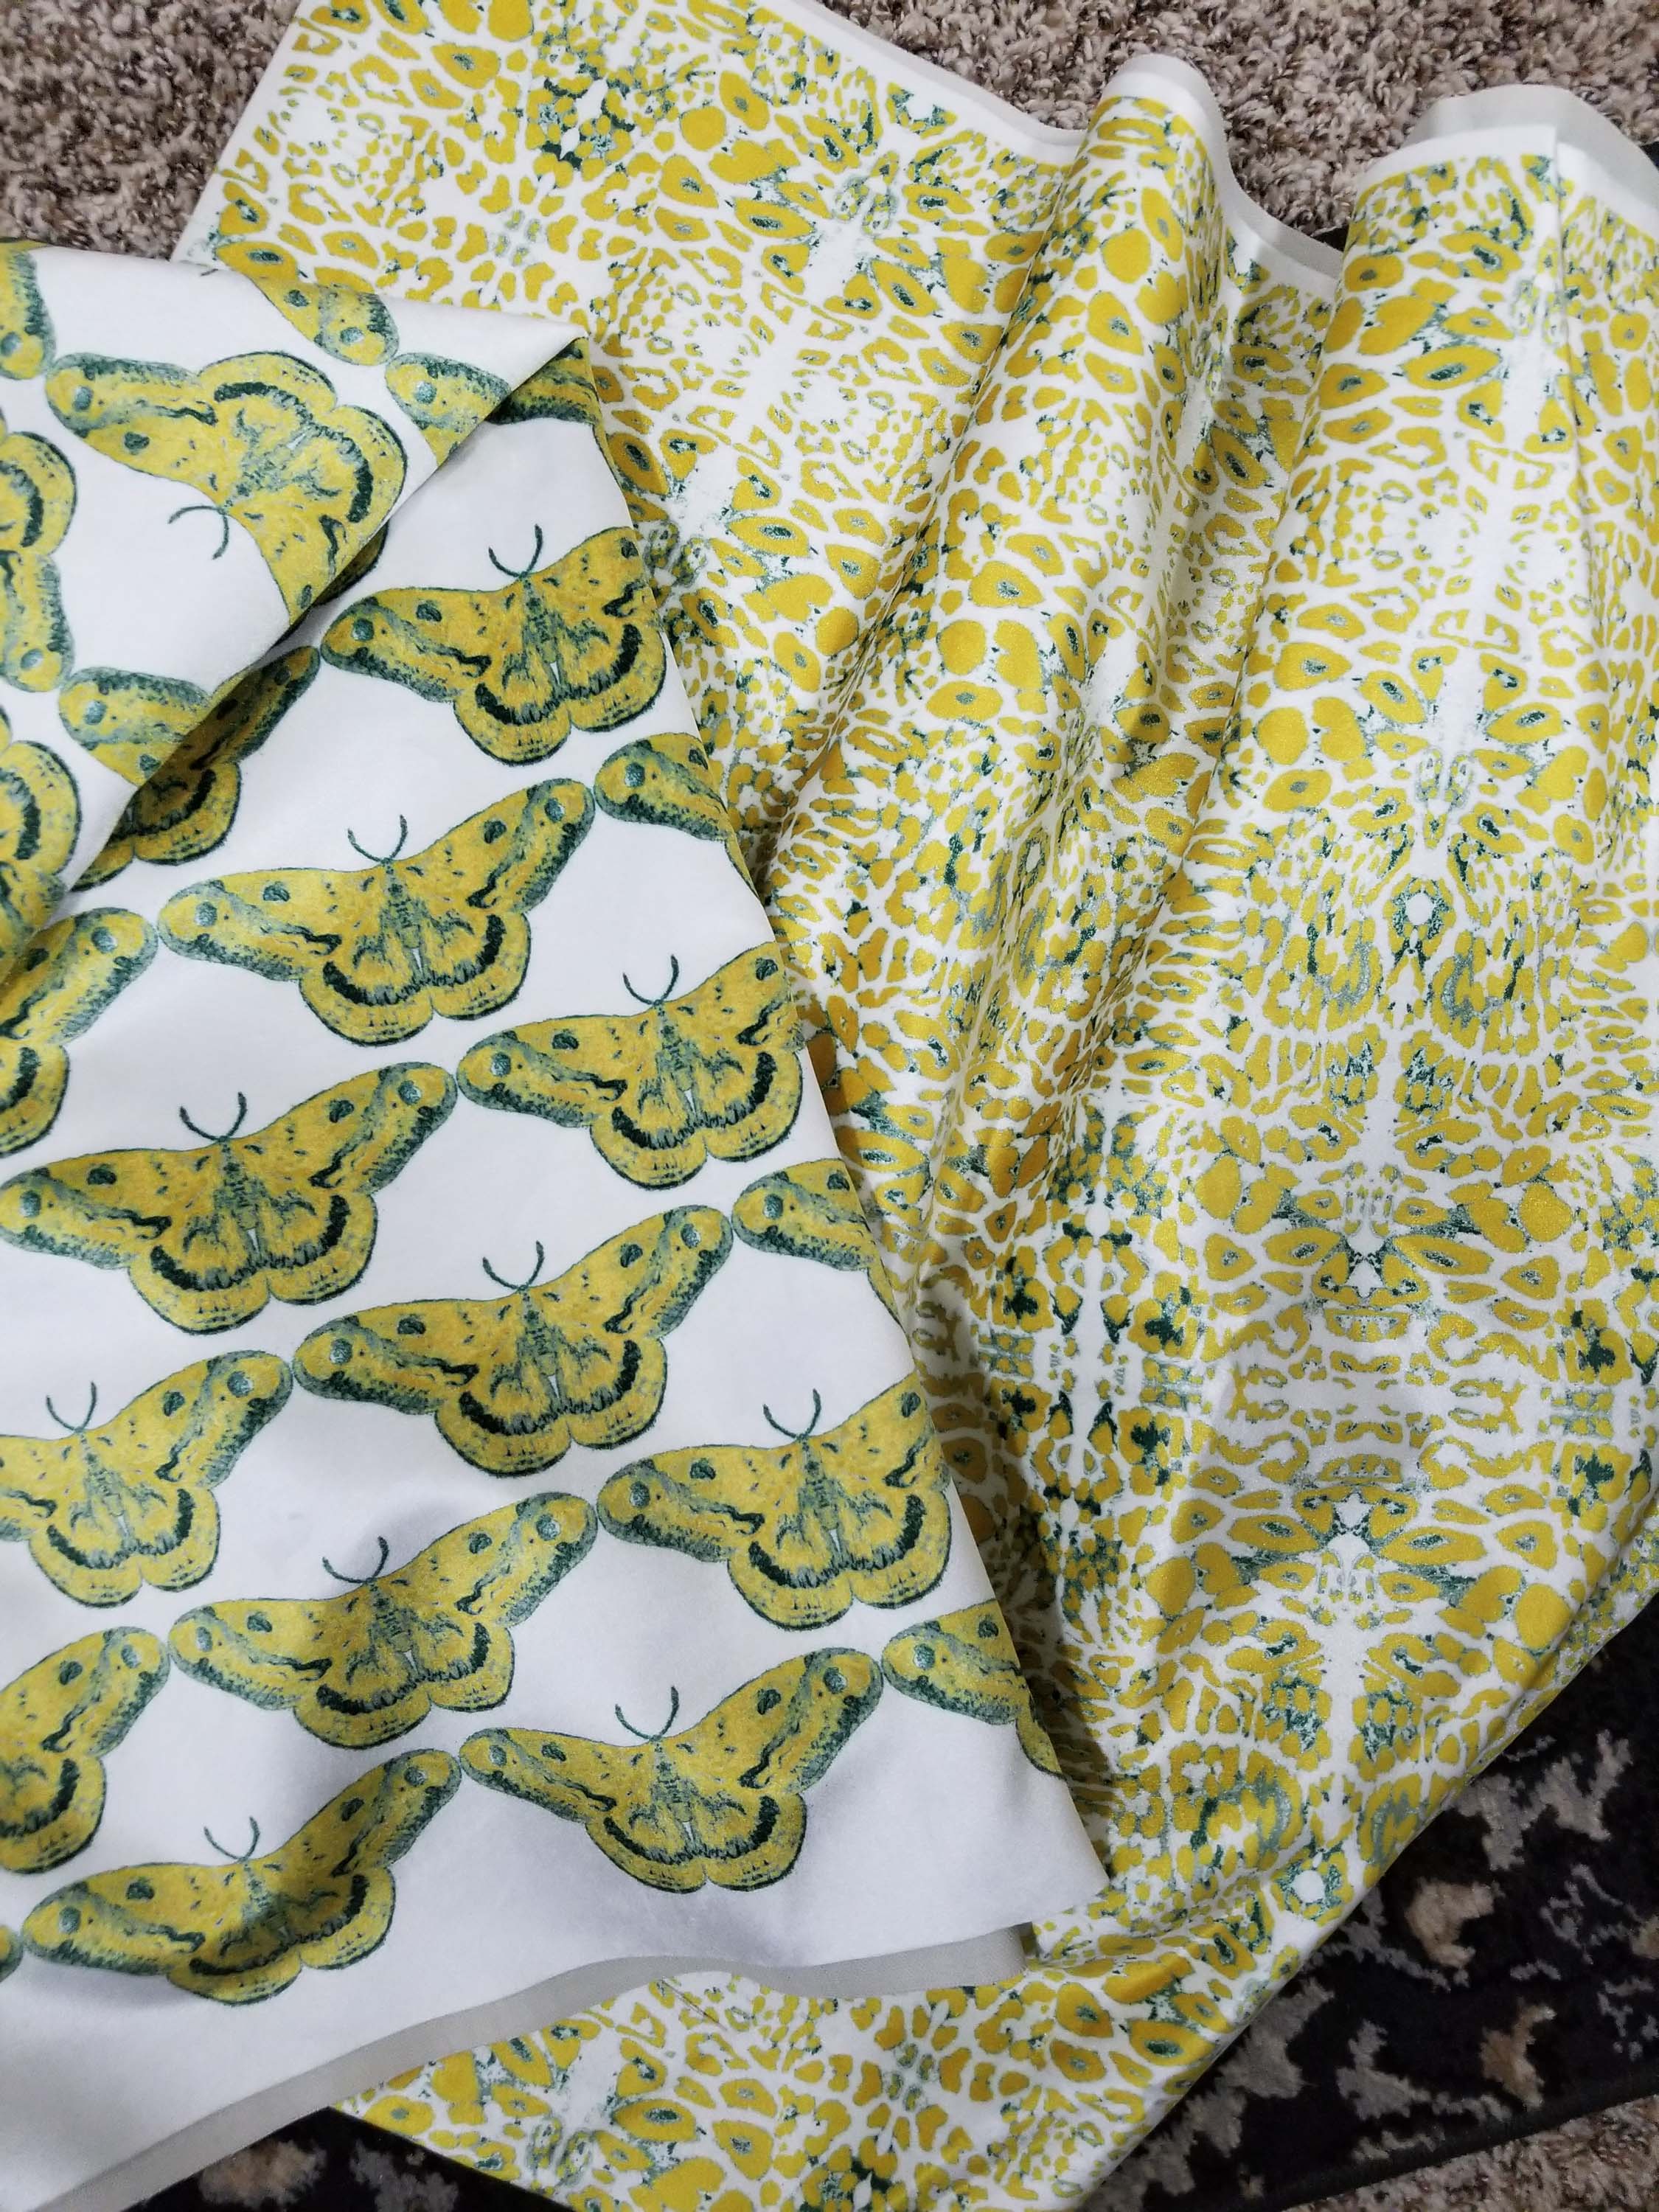 Yellow colored printed fabric